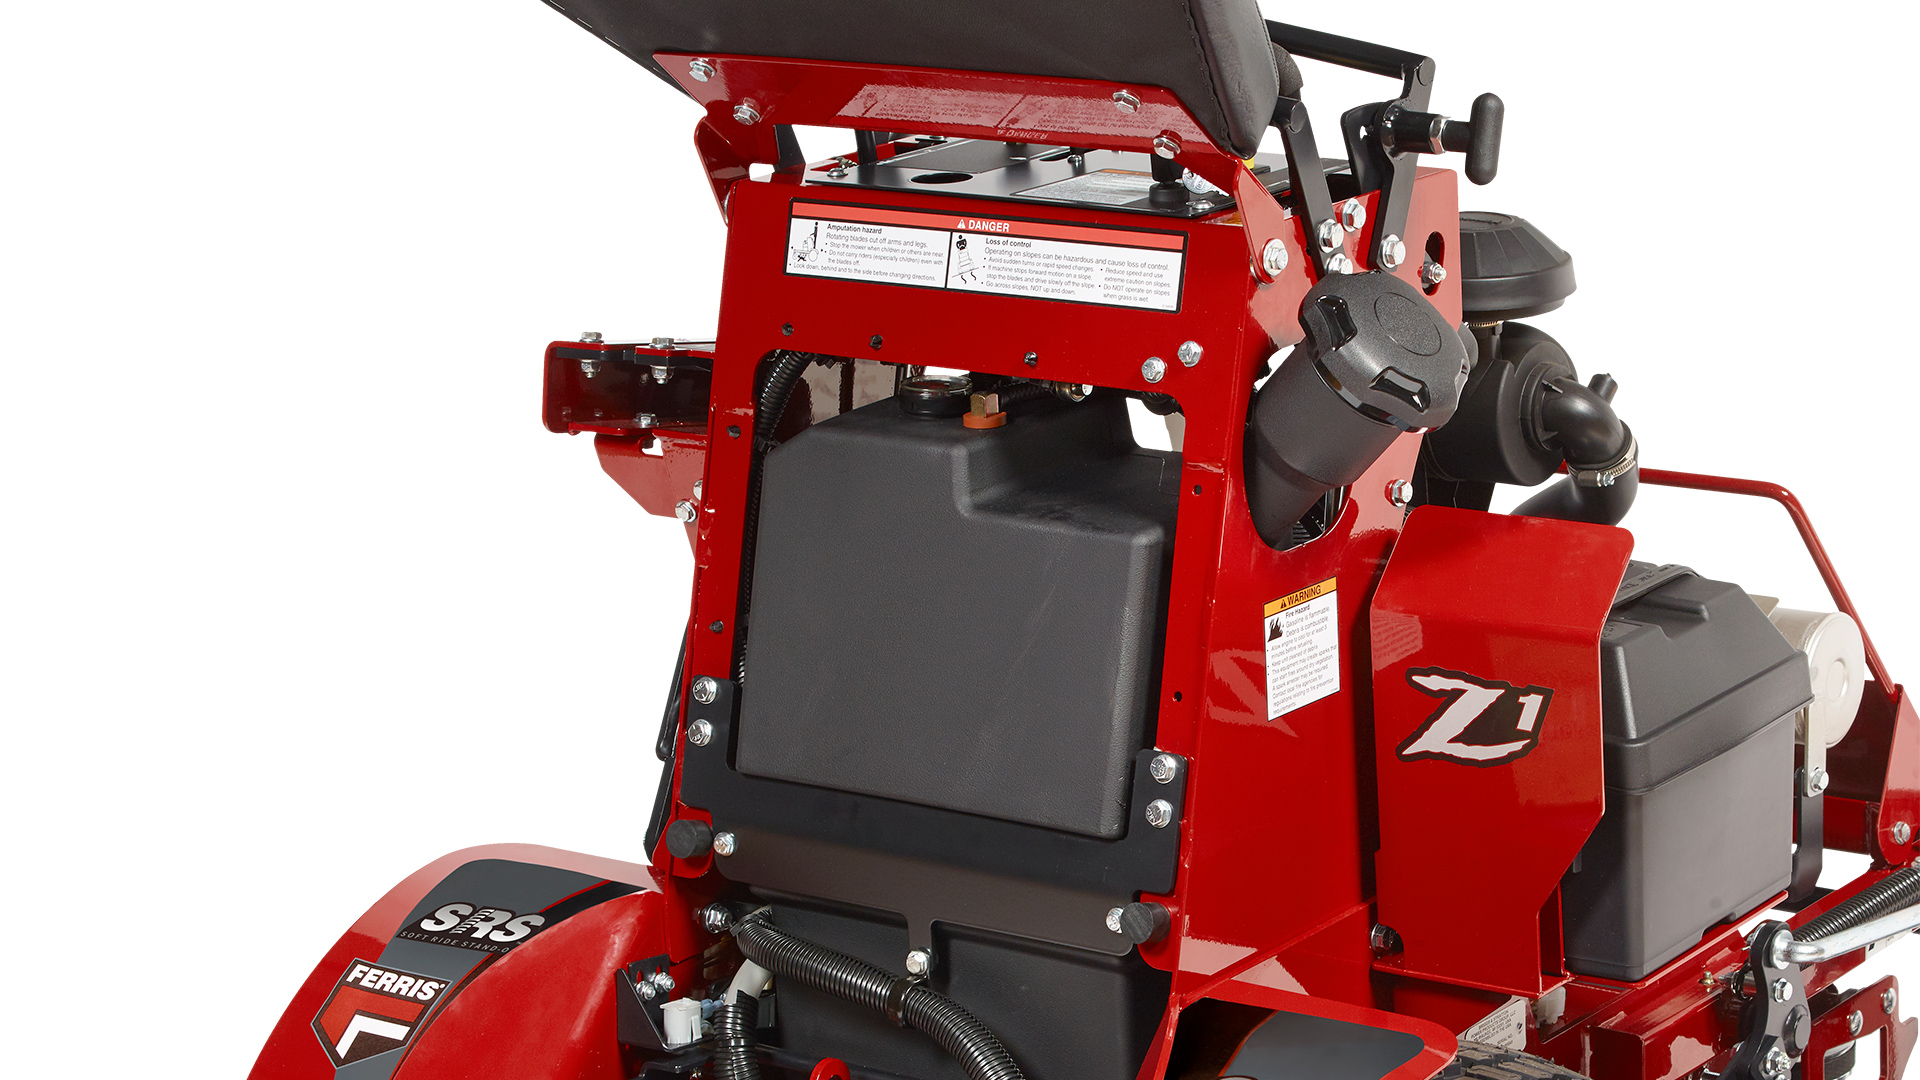 Ferris SRS™ Z1 Soft Ride Stand-On Mowers - Generous Fuel Capacity